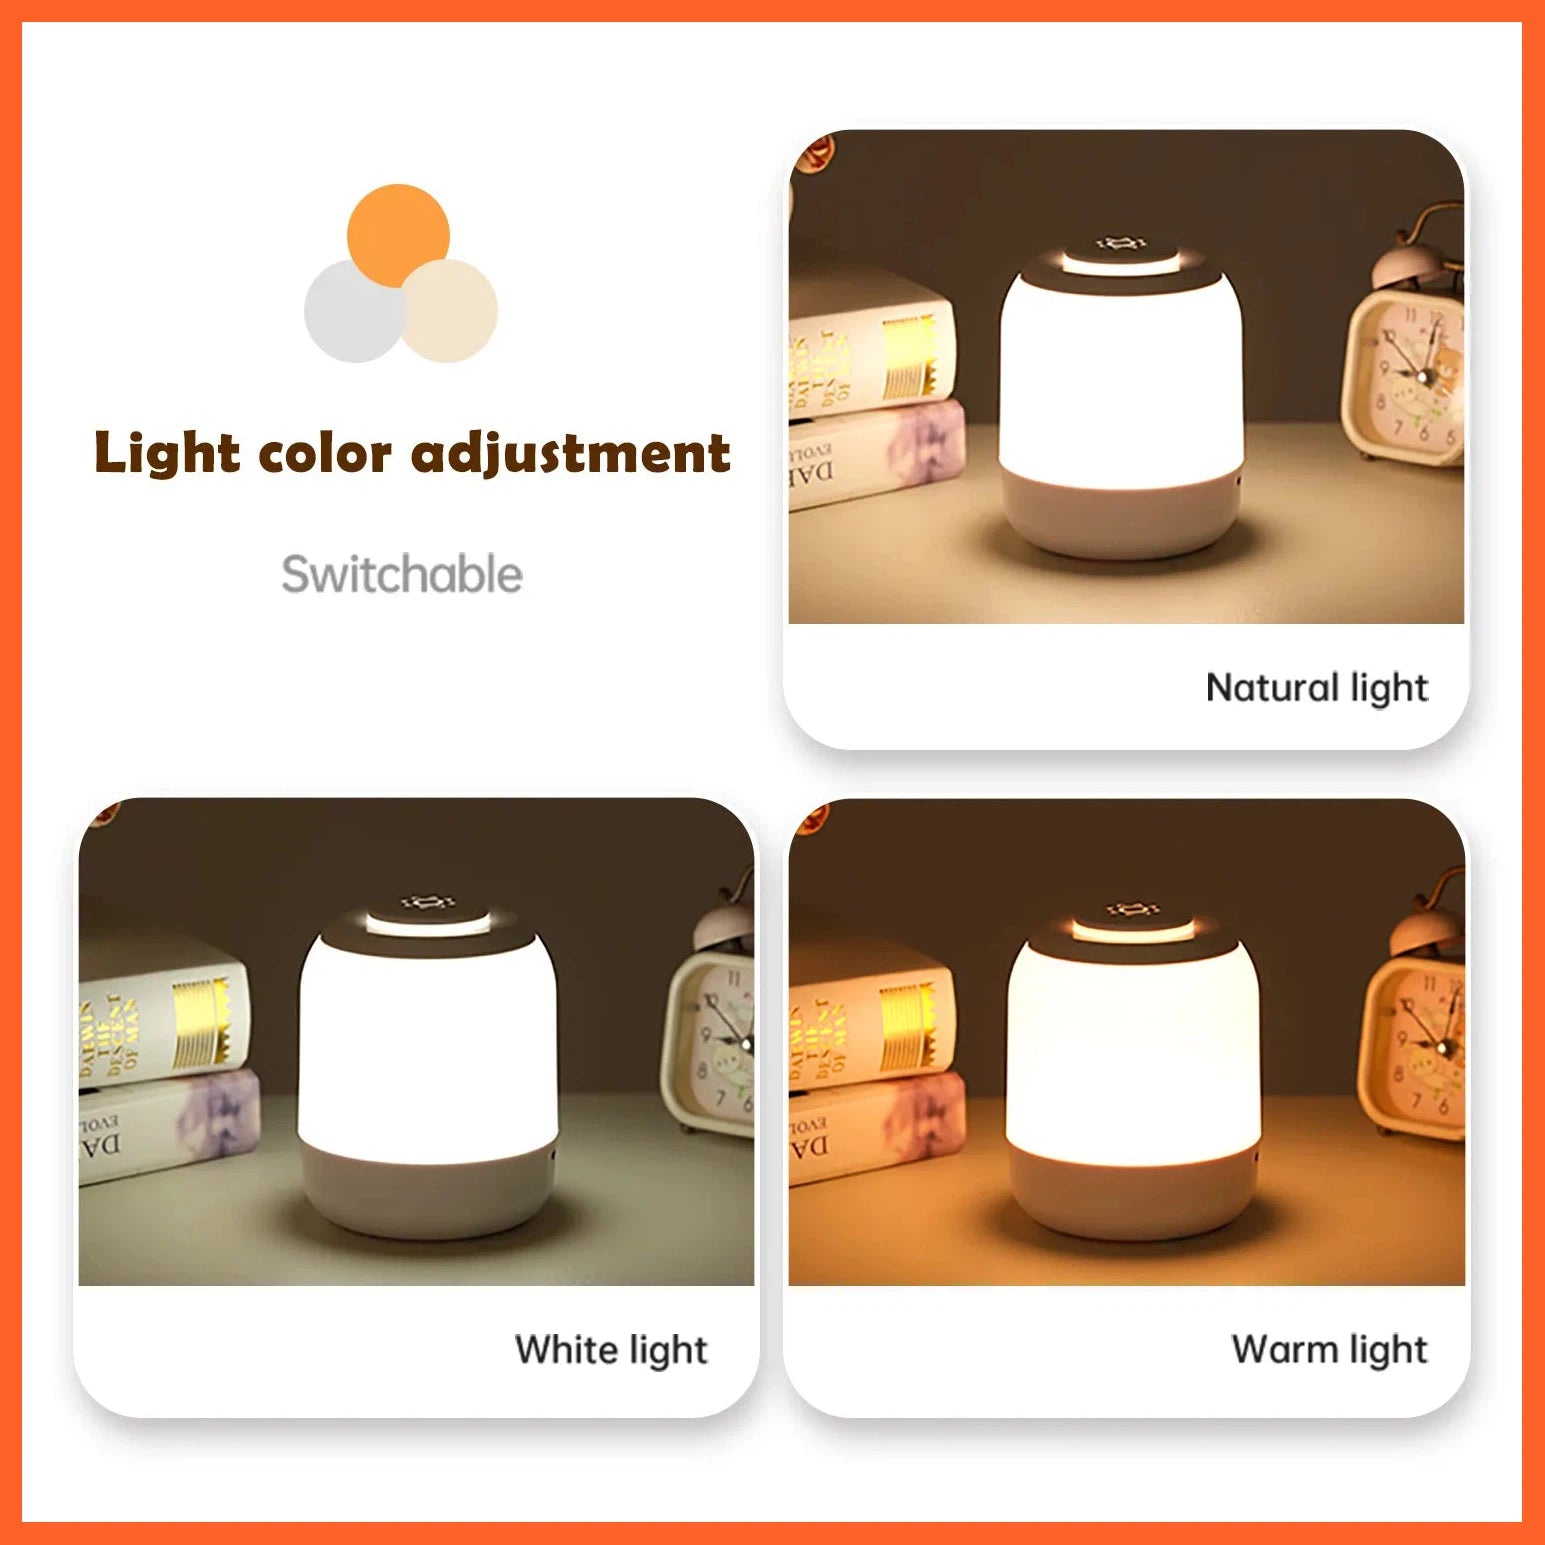 Portable Bedside Touch Lamp Led | Night Light Dimming Baby Sleeping Lamp | 3 Color With Touch Sensor Light For Living Room Bedroom